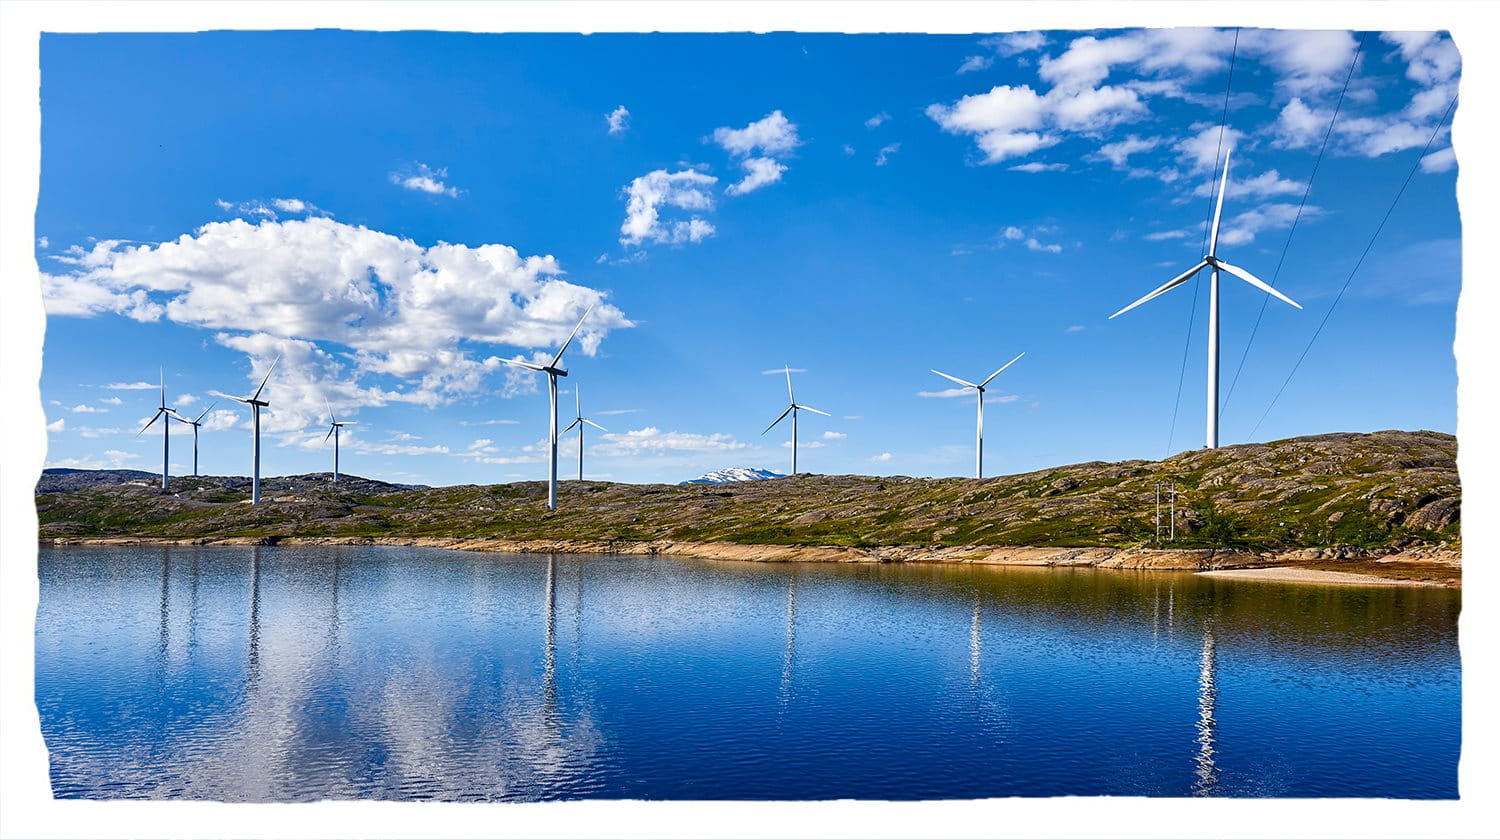 Wind turbines visible on the hills alongside a lake.